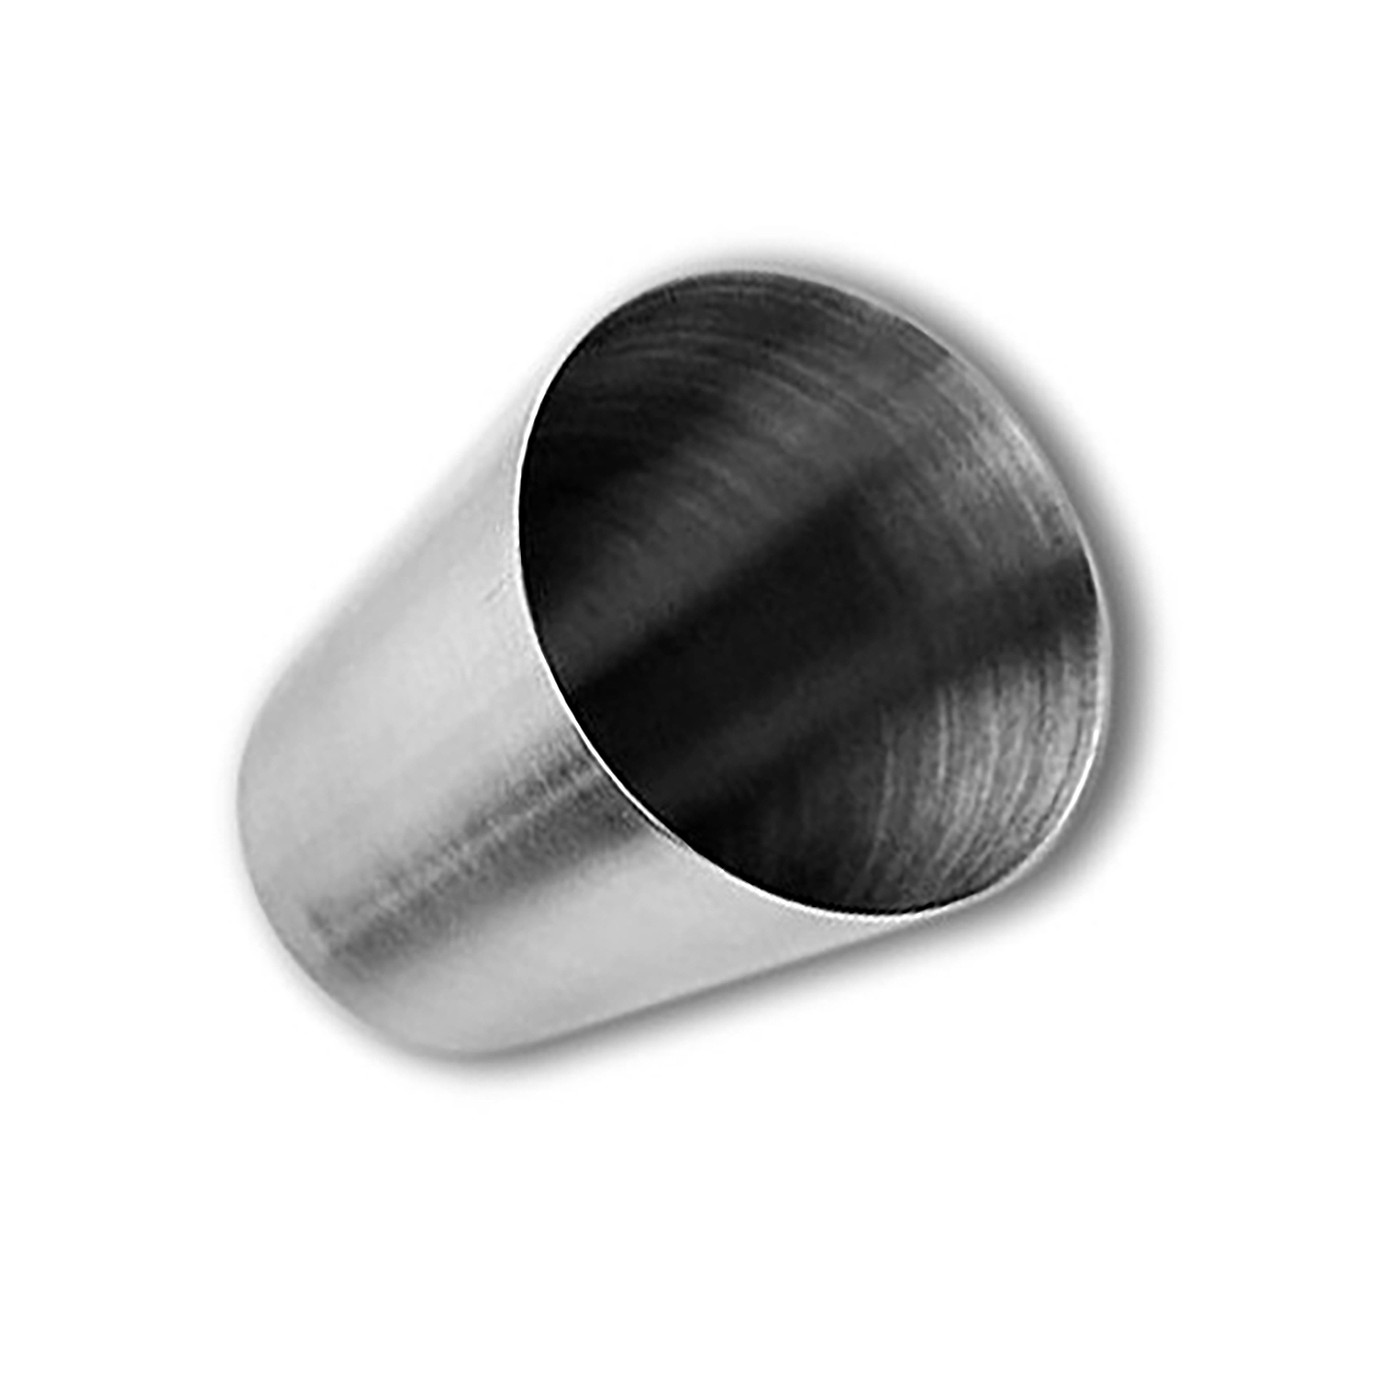 Stainless steel cup (1 single piece), 30 ml